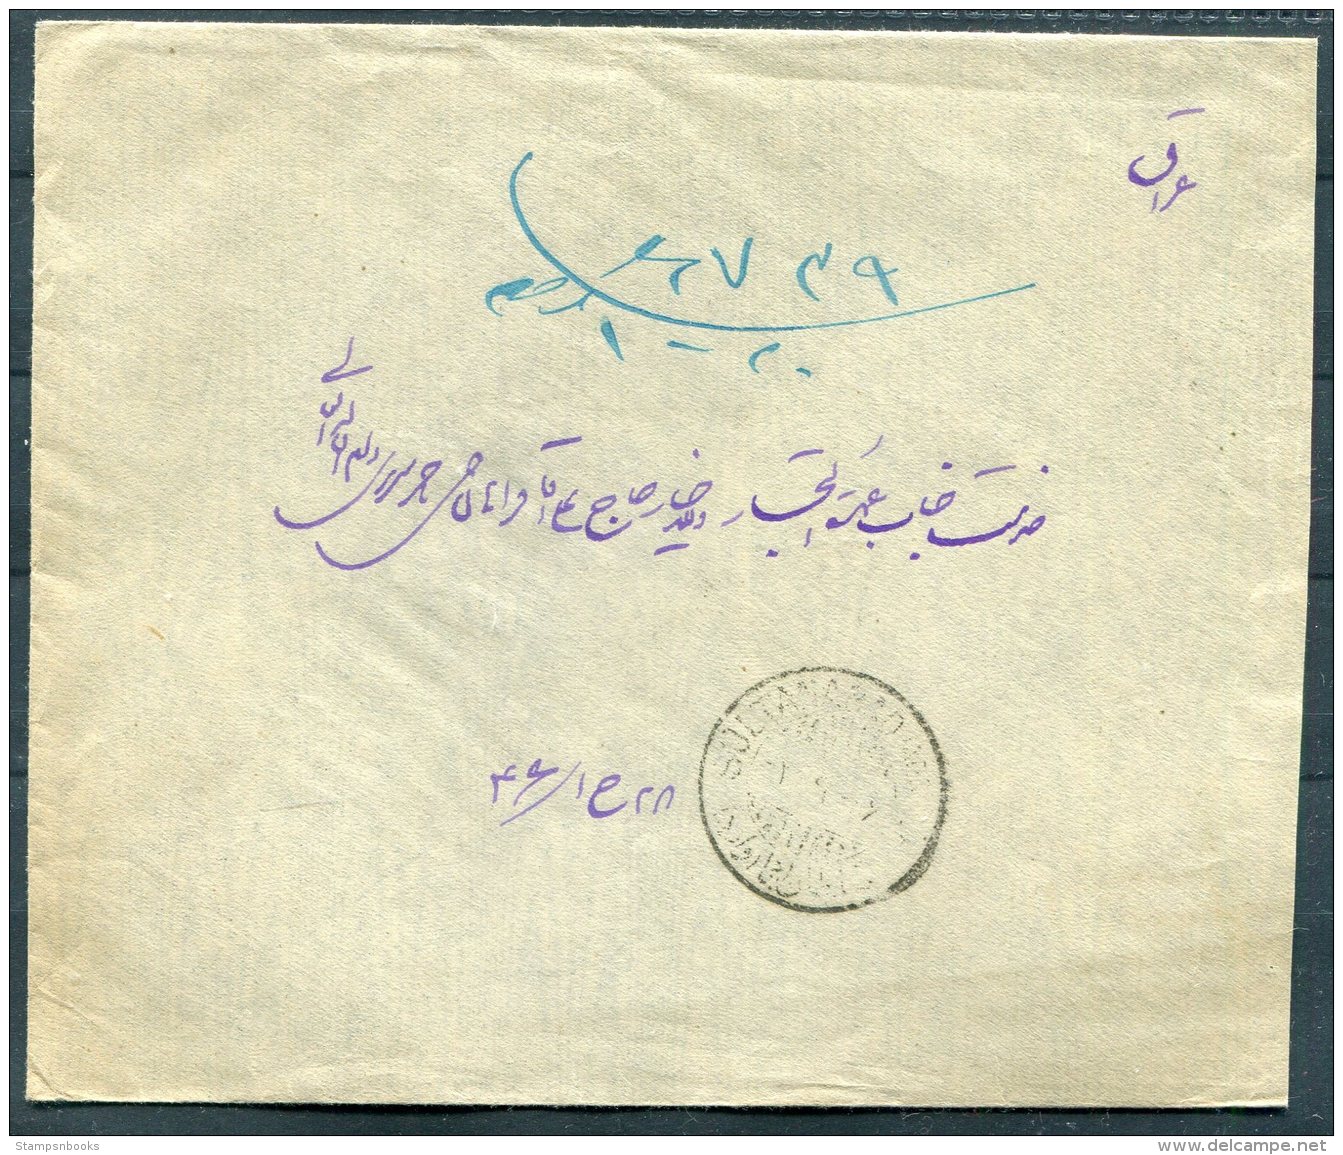 1927 Persia Iran Regne De Pahlavi Overprints, 1926 Shah Issue Mixed Franking Registered Rate Cover. Teheran - Sultanabad - Iran